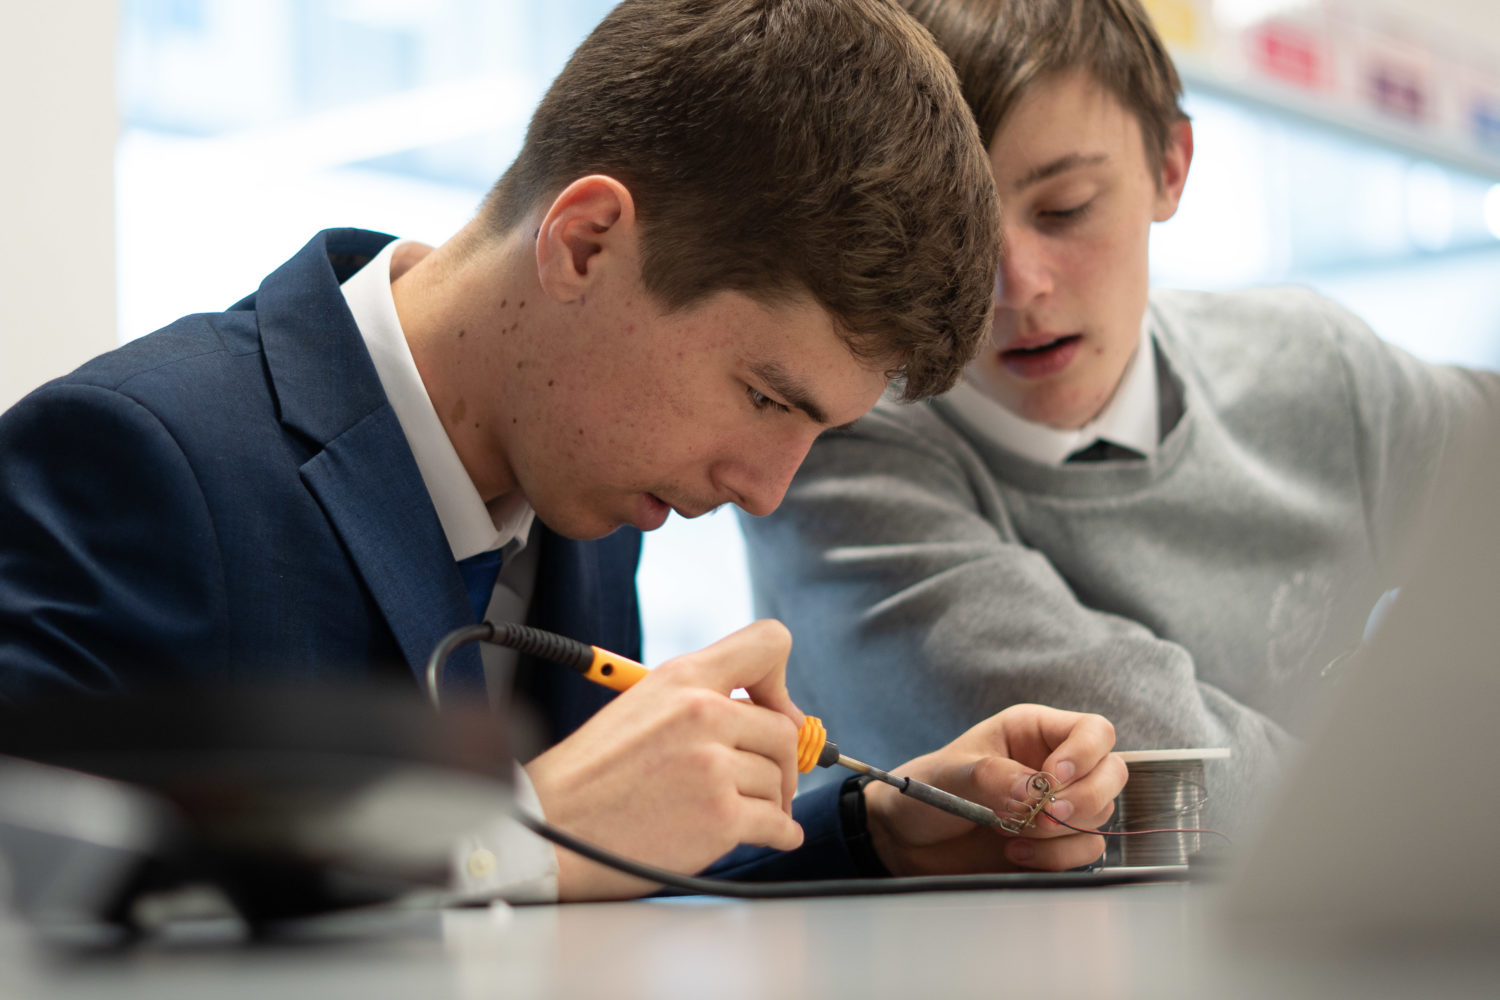 Two Leigh UTC students are shown sitting next to each other at a desk. One is shown using a soldering iron on a piece of wire.